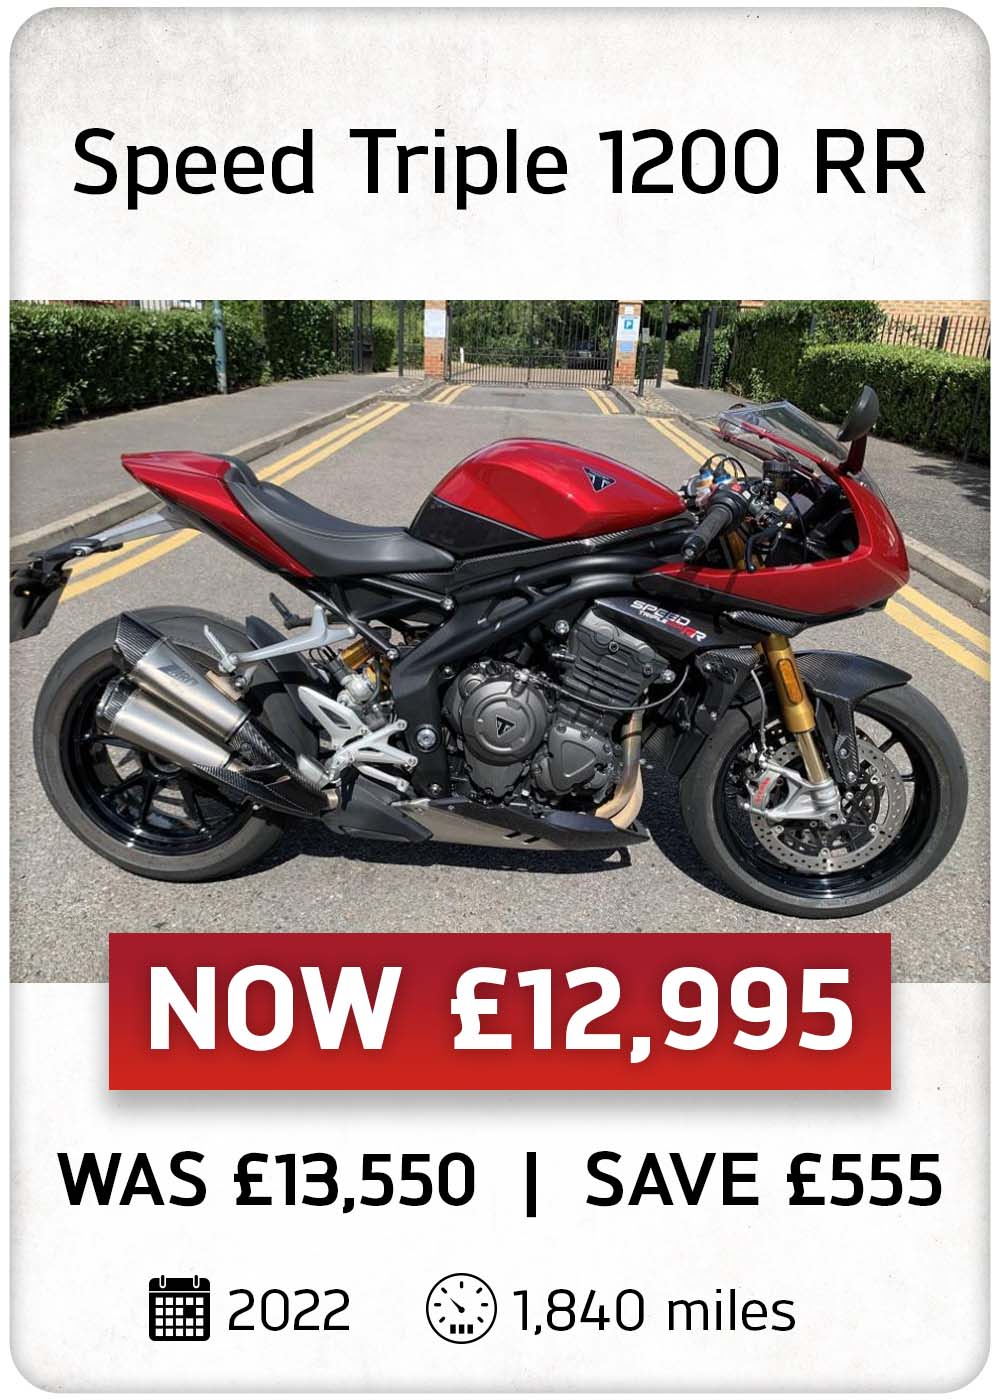 Triumph SPEED TRIPLE 1200 RR for sale in our Used Bike Specials at Laguna Motorcycles in Maidstone